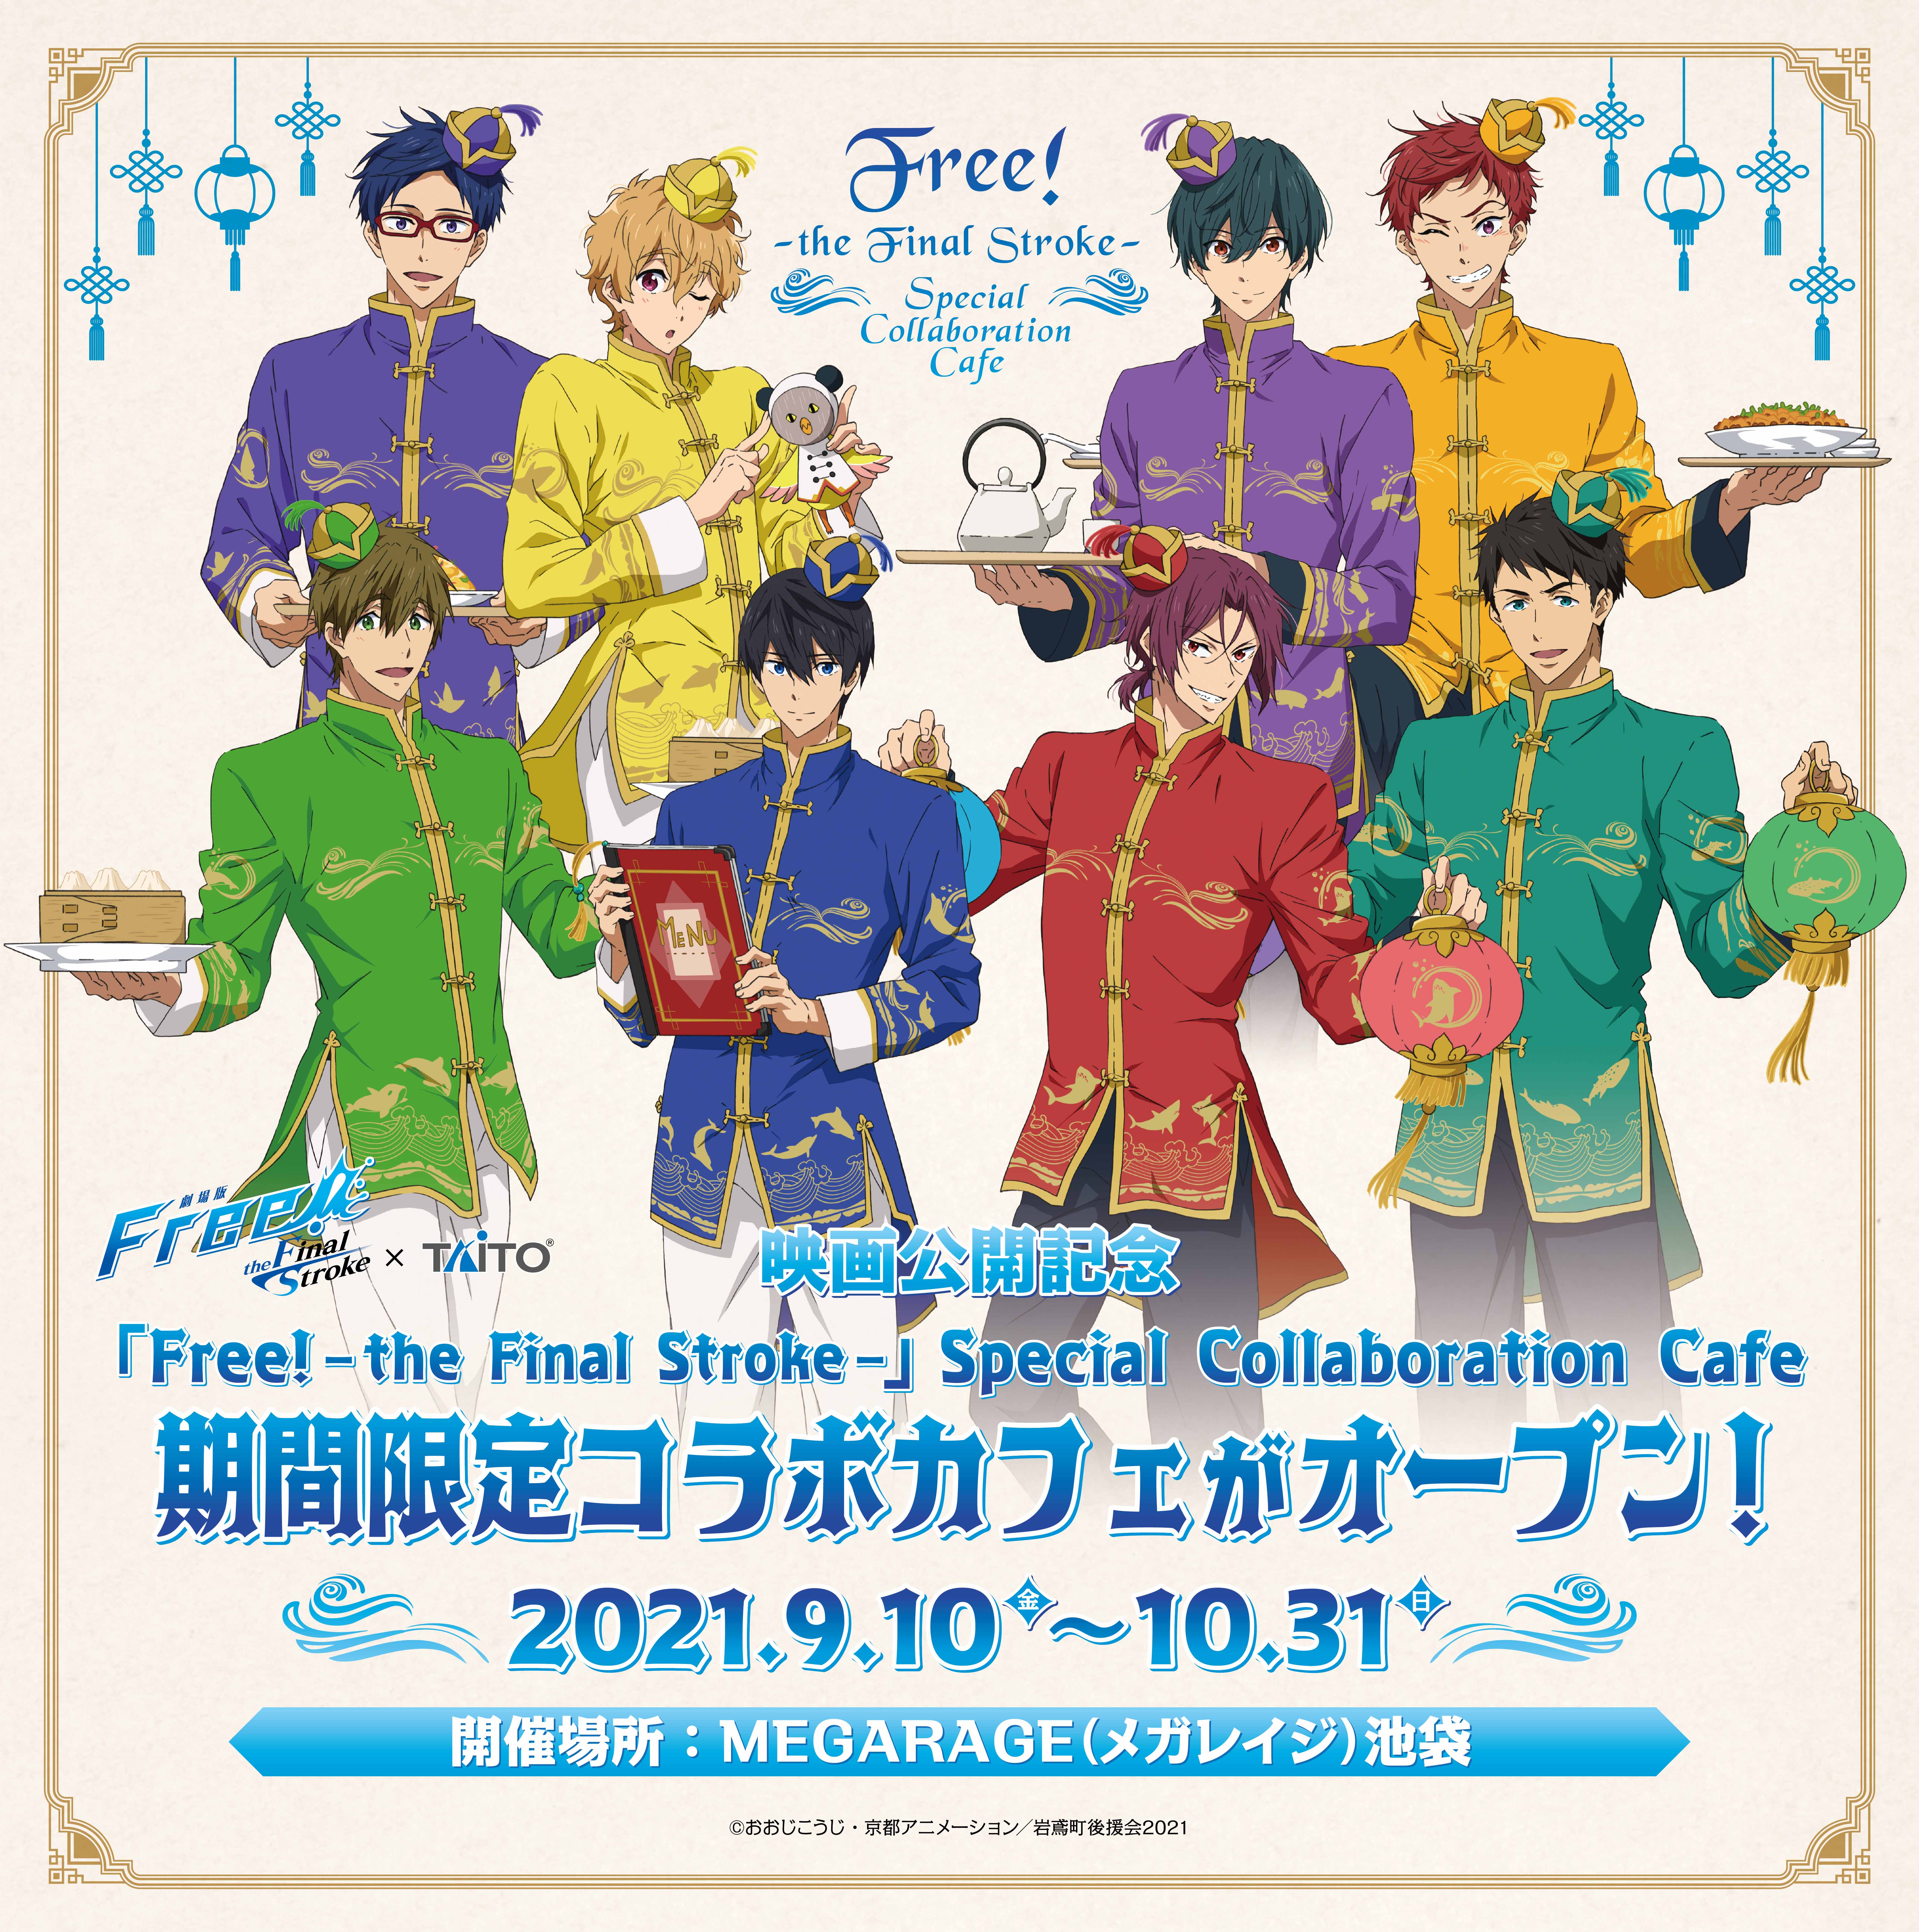 「Free!–the Final Stroke–」Special Collaboration CafeがMEGARAGE池袋にて期間限定オープン！のサブ画像1